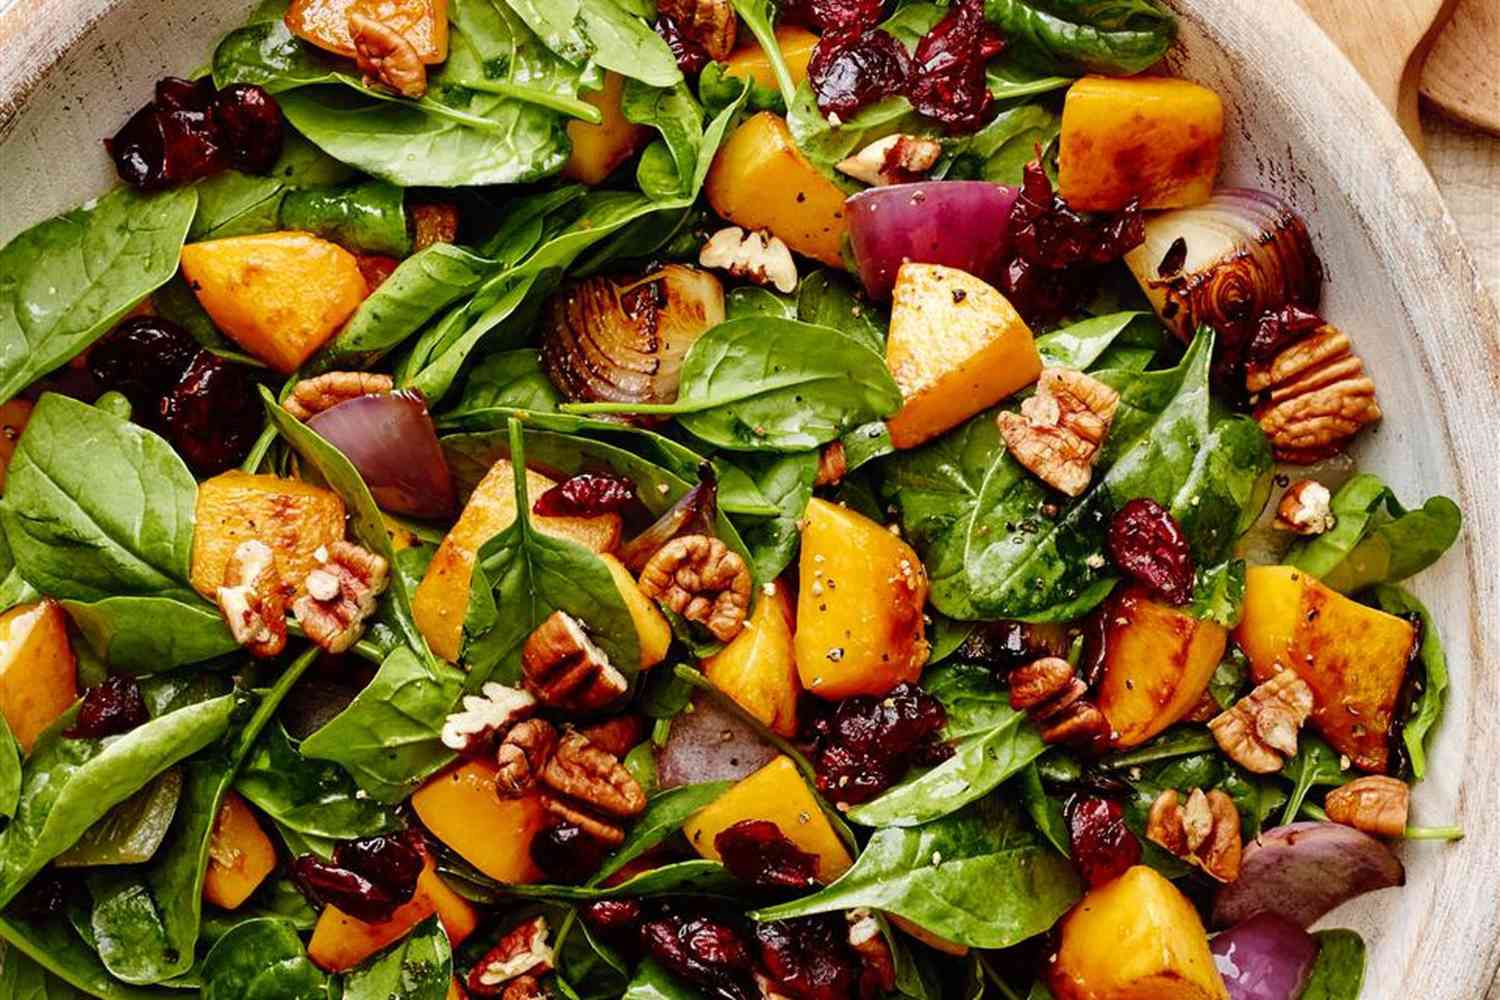 Roasted Butternut Squash with Onions, Spinach, and Craisins